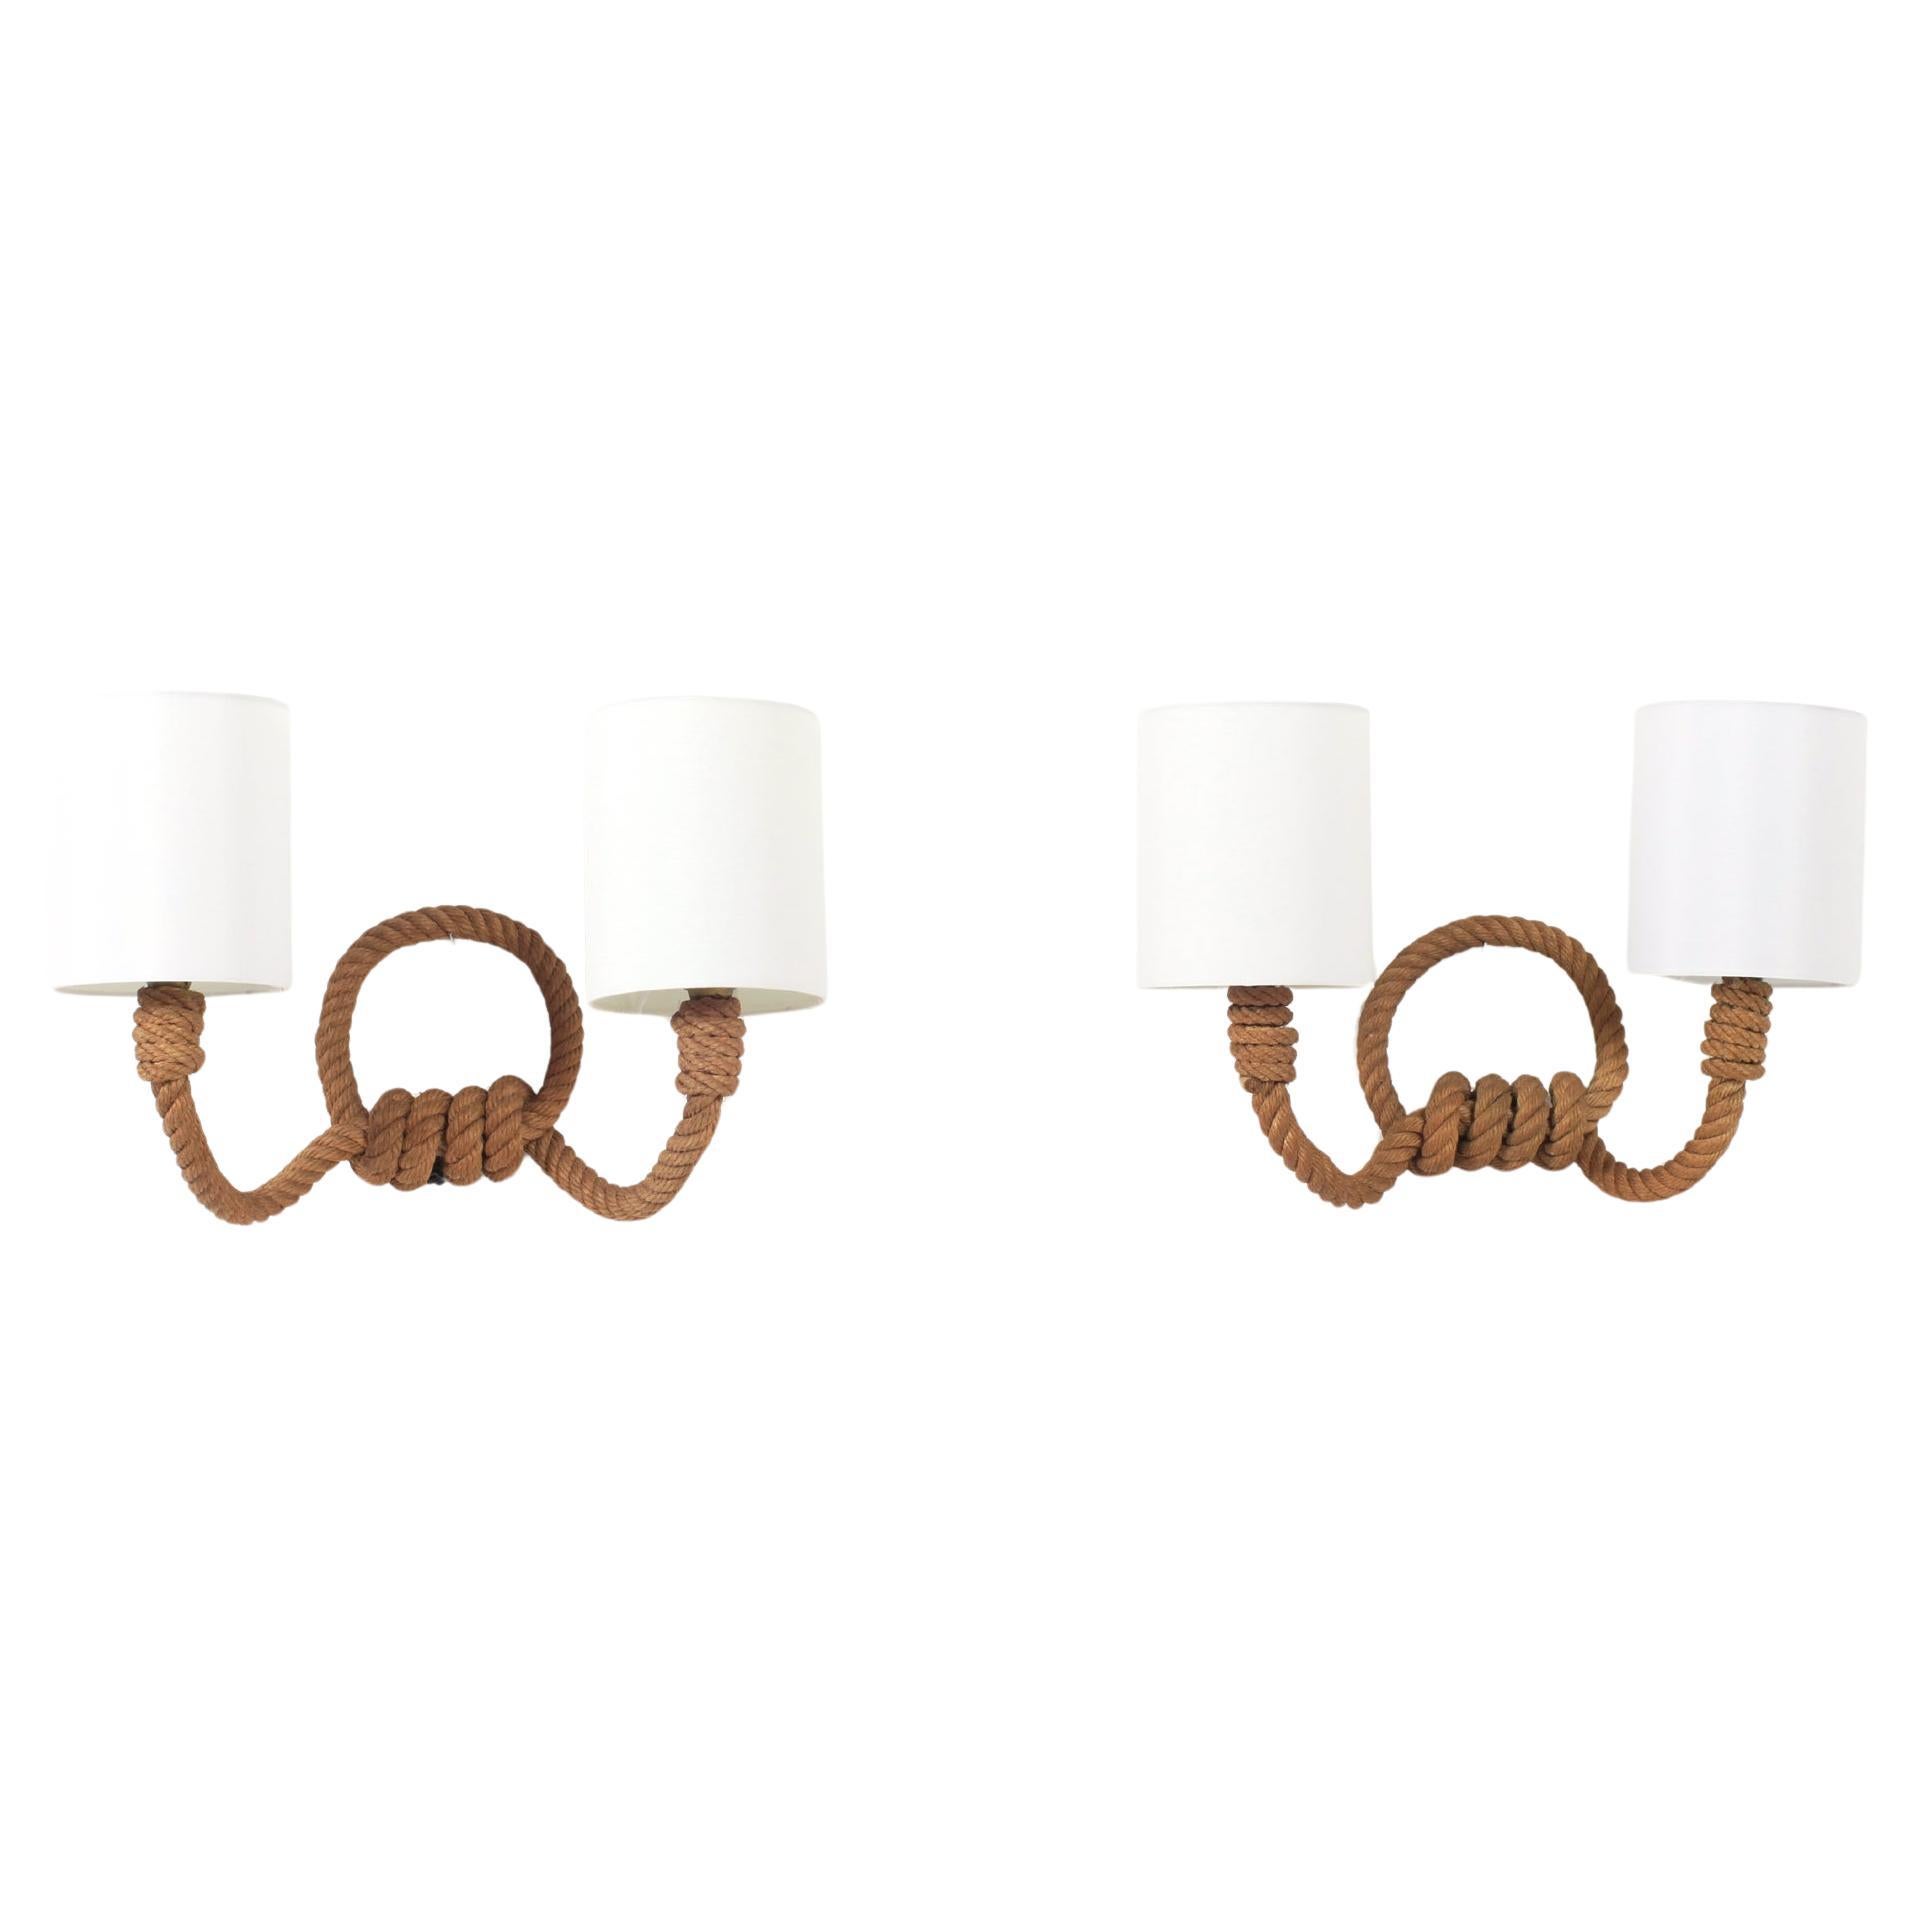 Audoux-Minet Pair of Two Lights Rope Sconces, France, 1950 For Sale